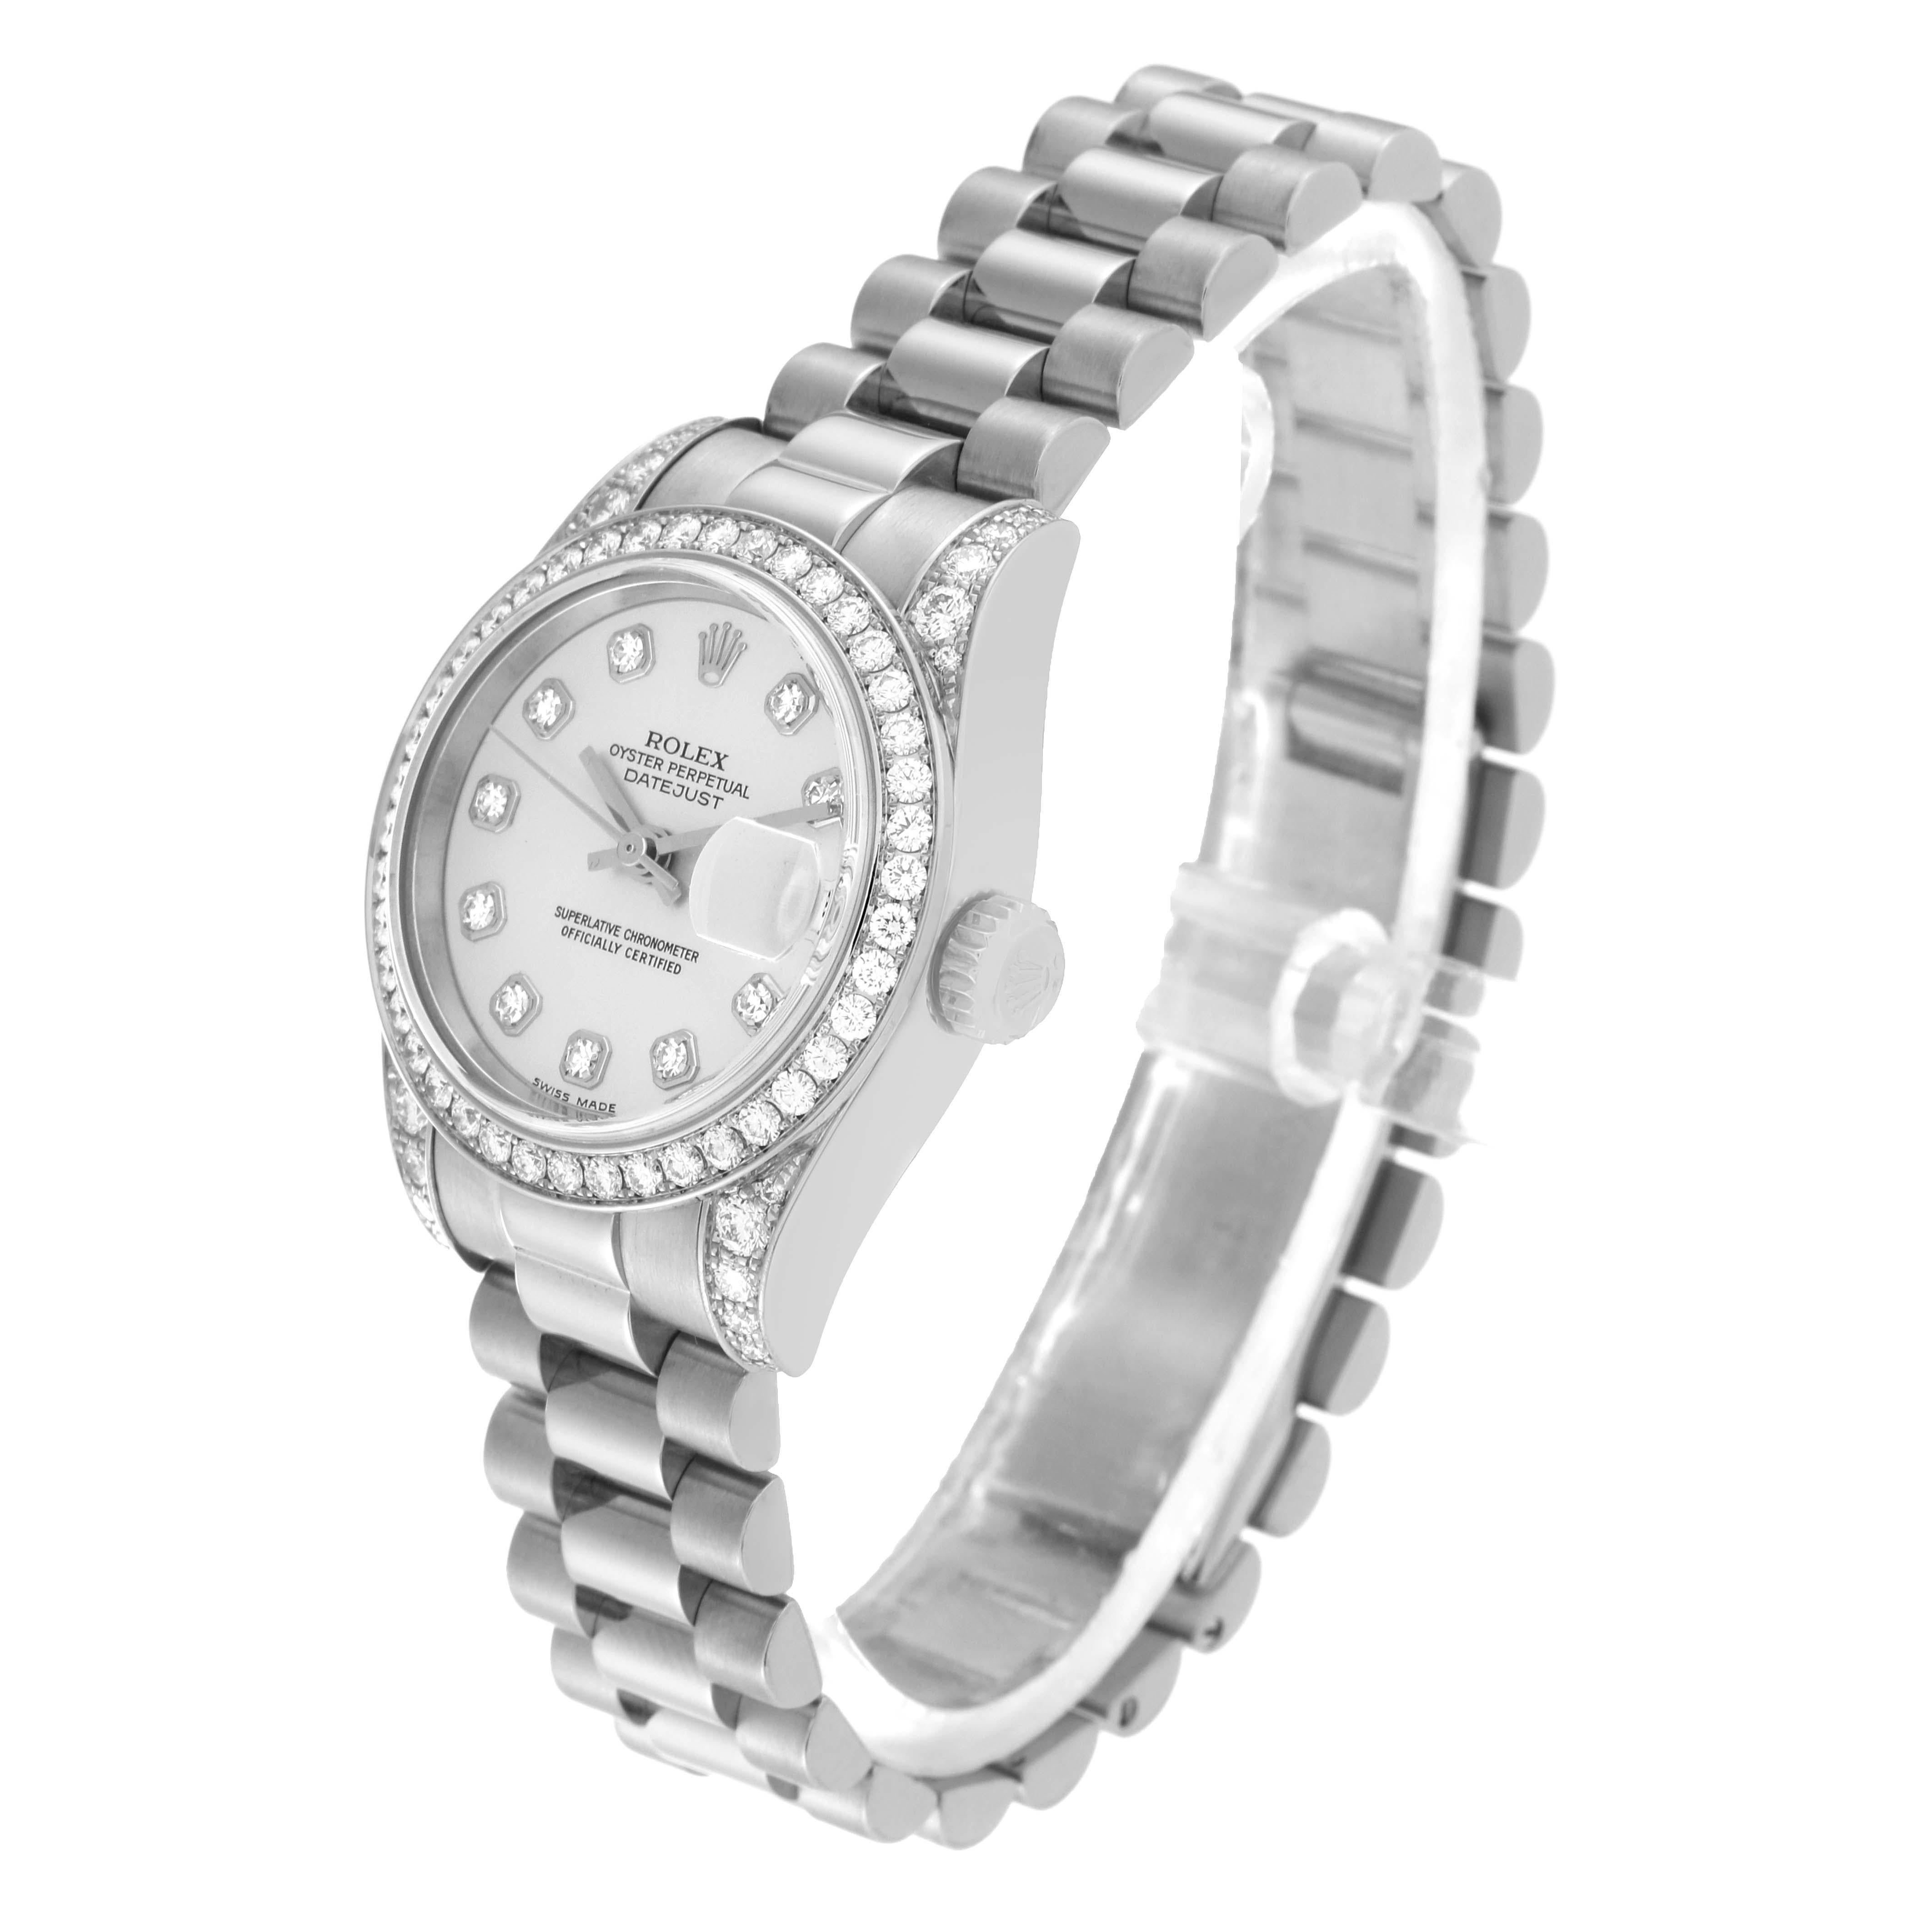 Rolex Datejust President White Gold Diamond Bezel Ladies Watch 179159 Box Papers For Sale 5